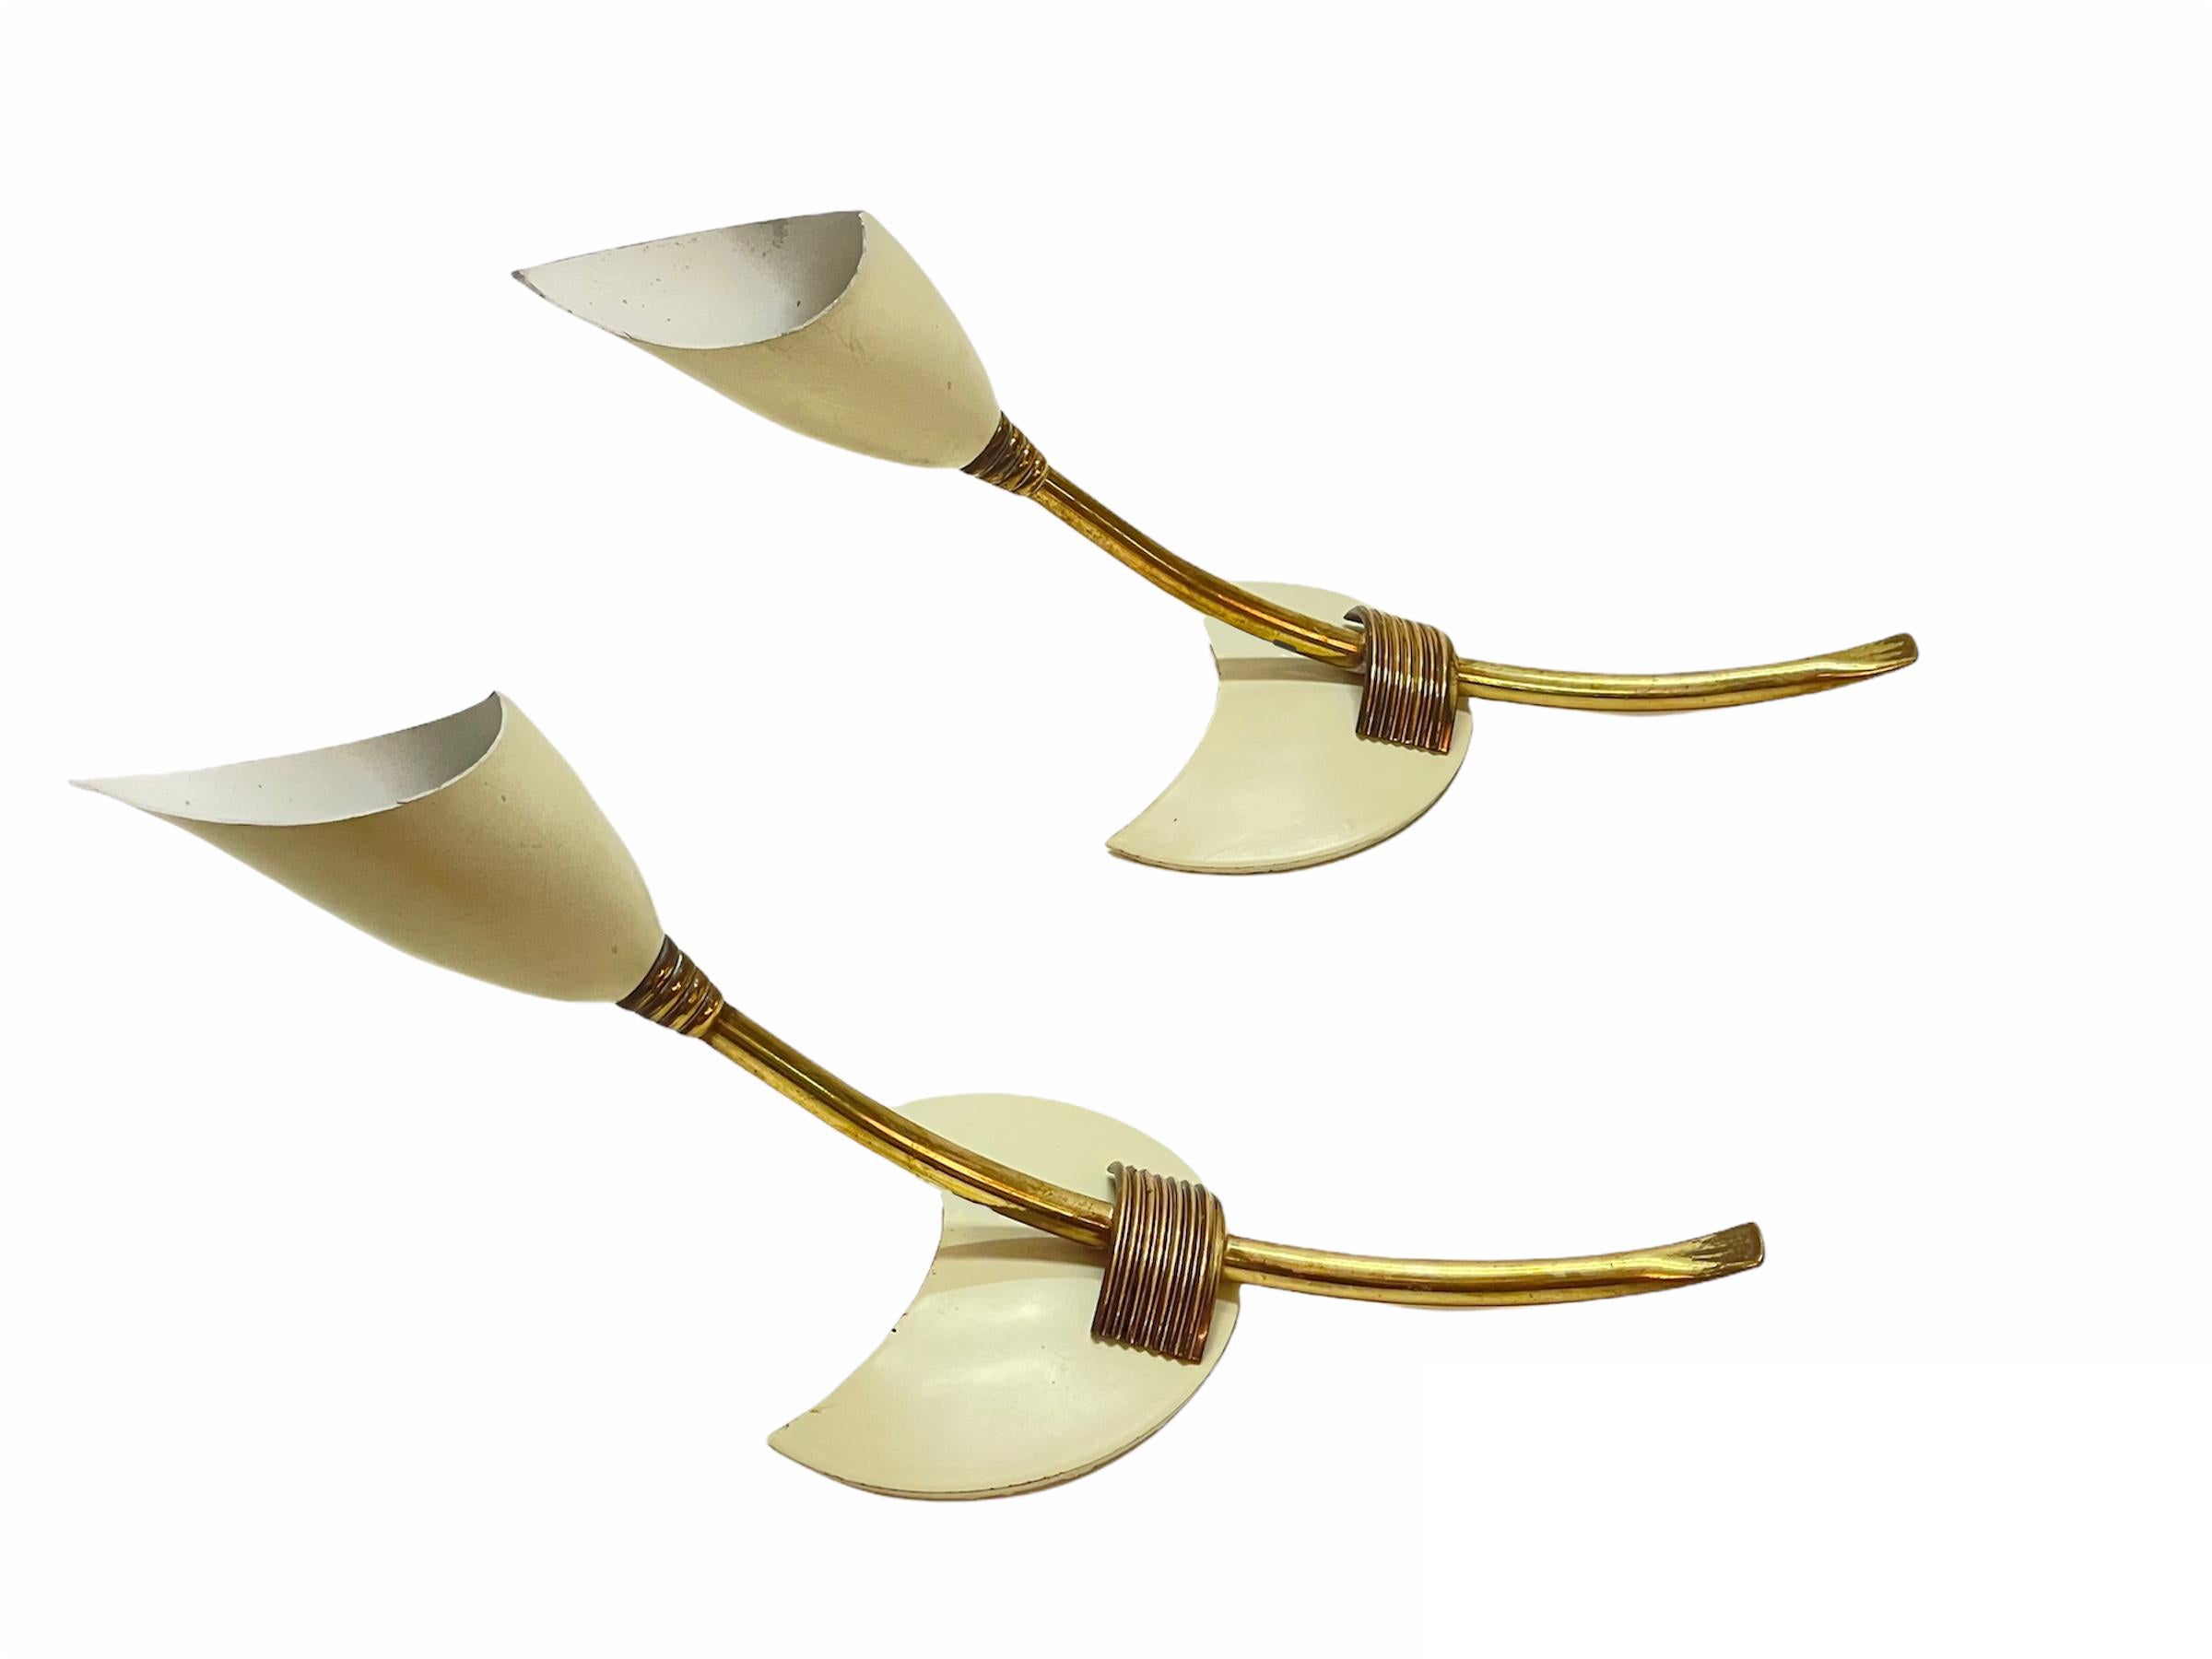 Pair of GCME Midcentury Brass and Enamelled Aluminum Italian Tulip Sconces 1950s For Sale 7